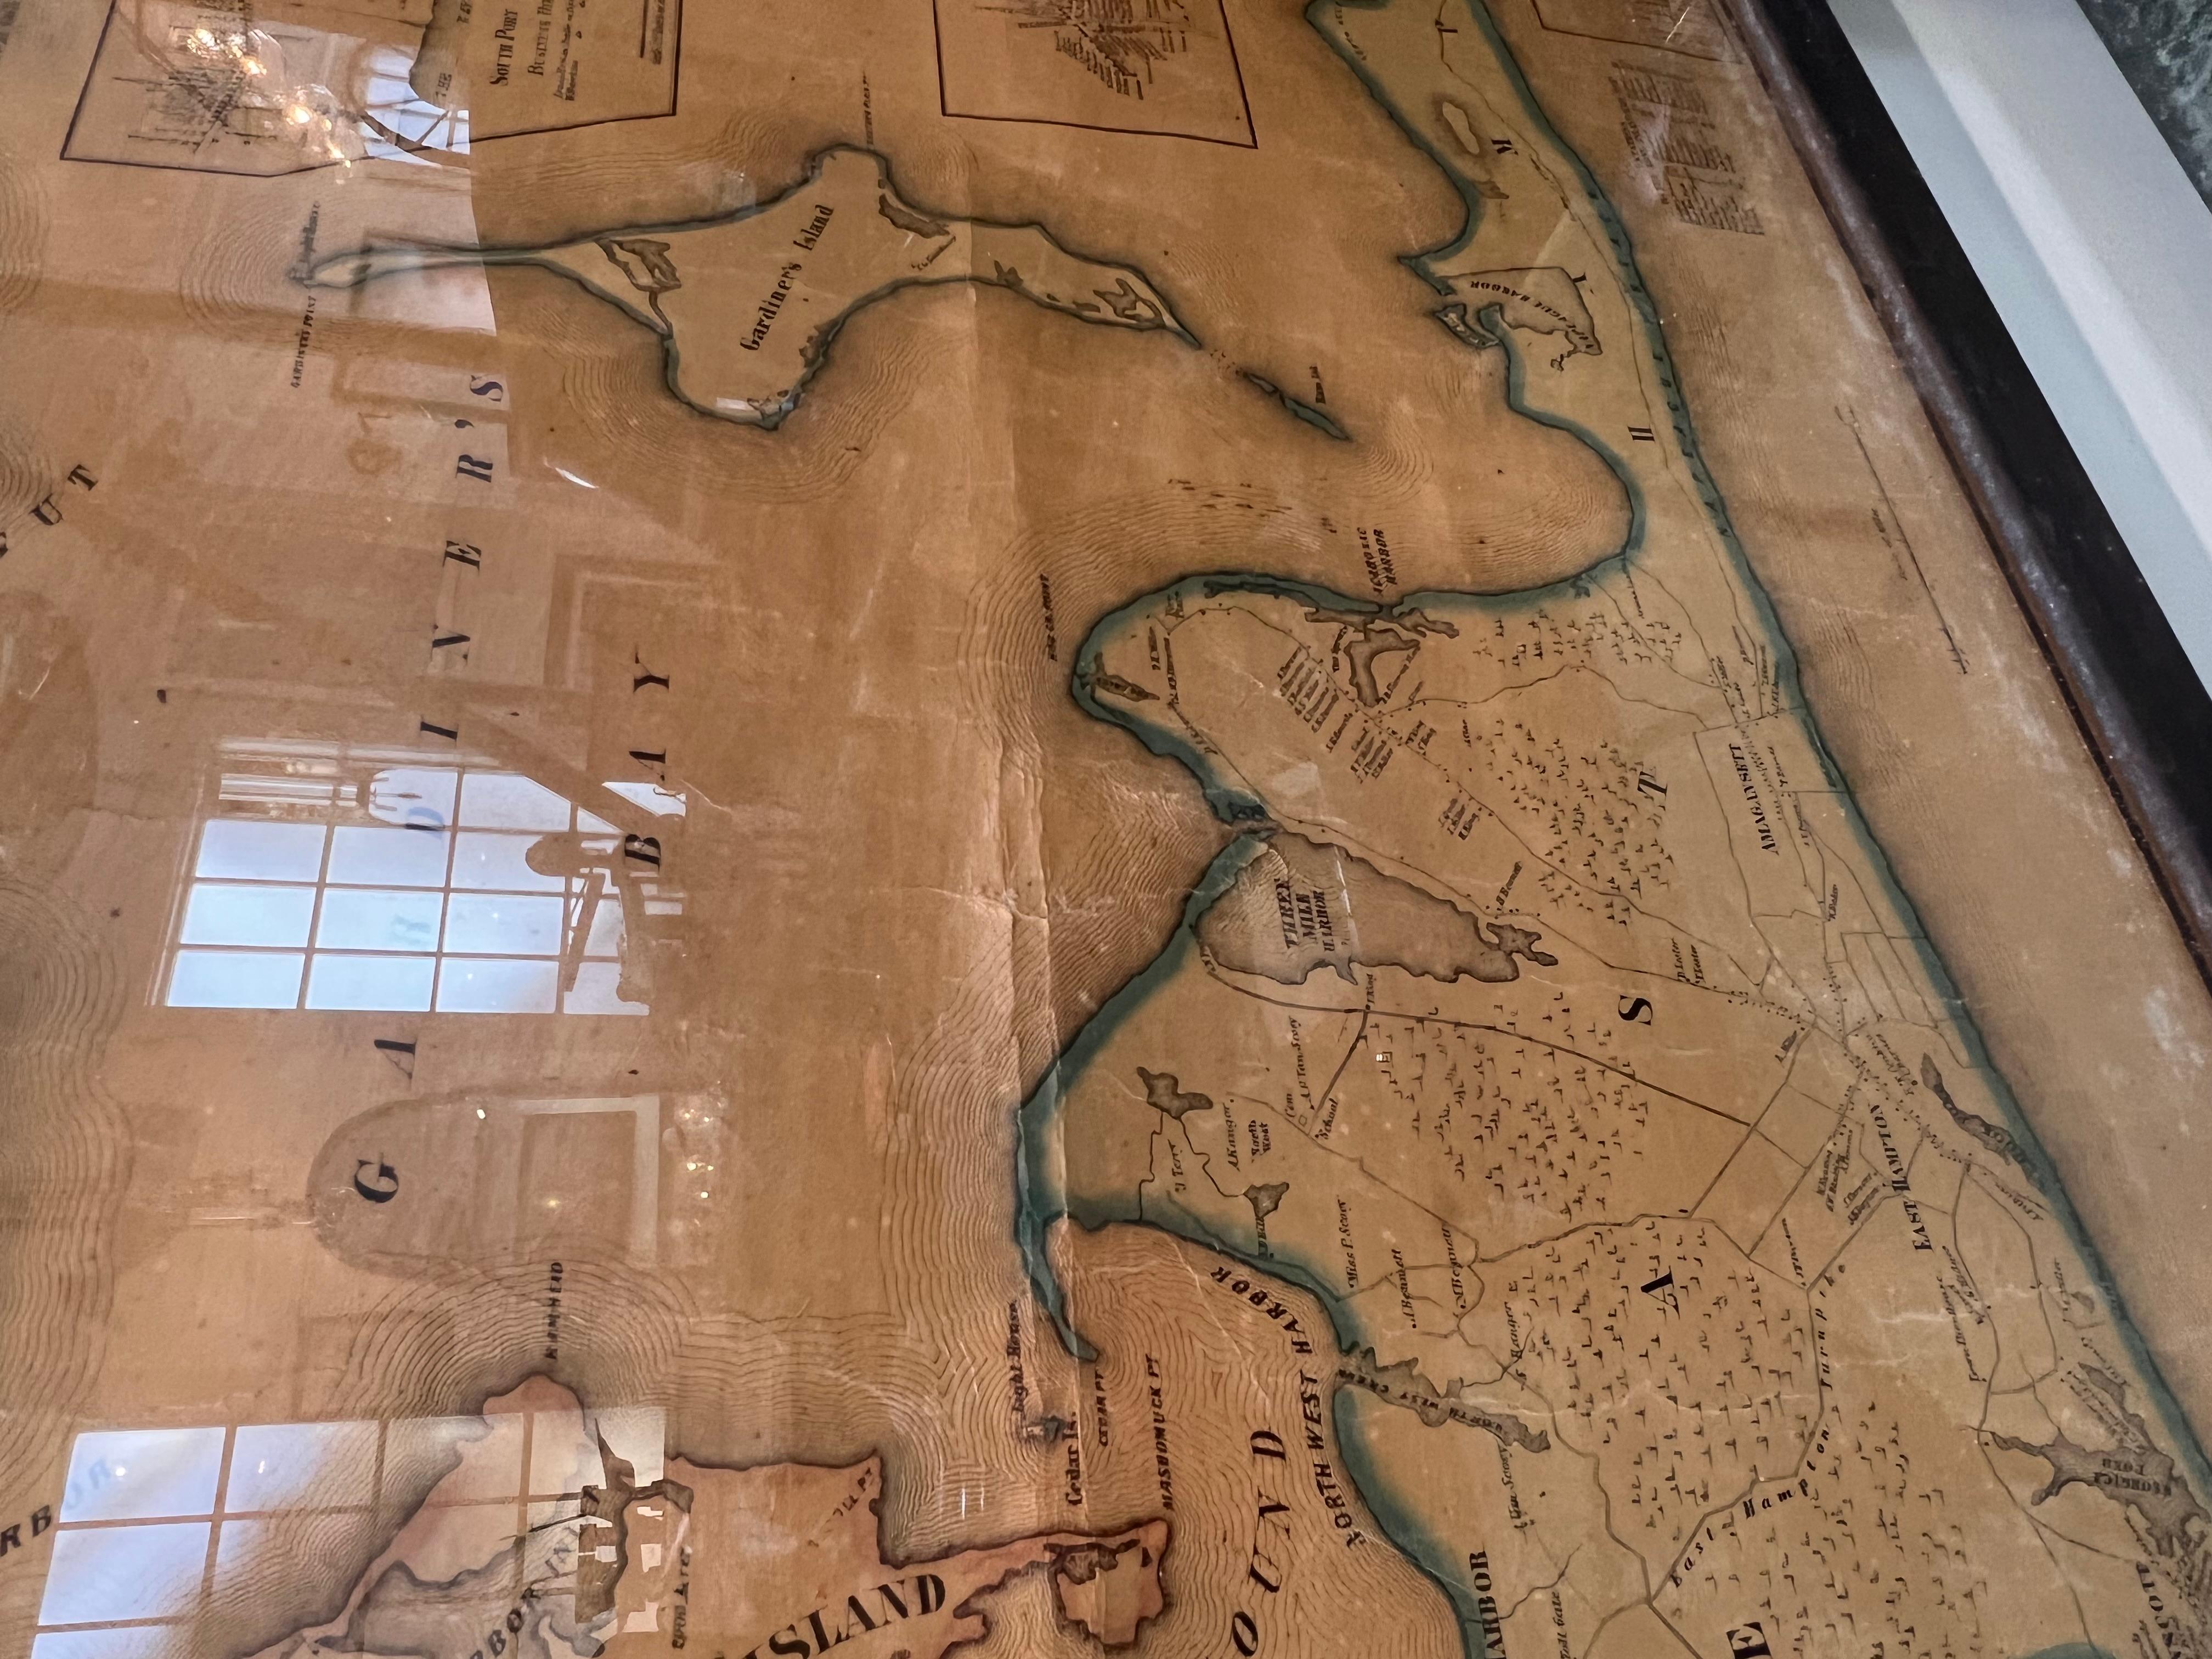 Framed Mid-19th Century Wall Map of Long Island, the Hamptons In Good Condition For Sale In Sag Harbor, NY